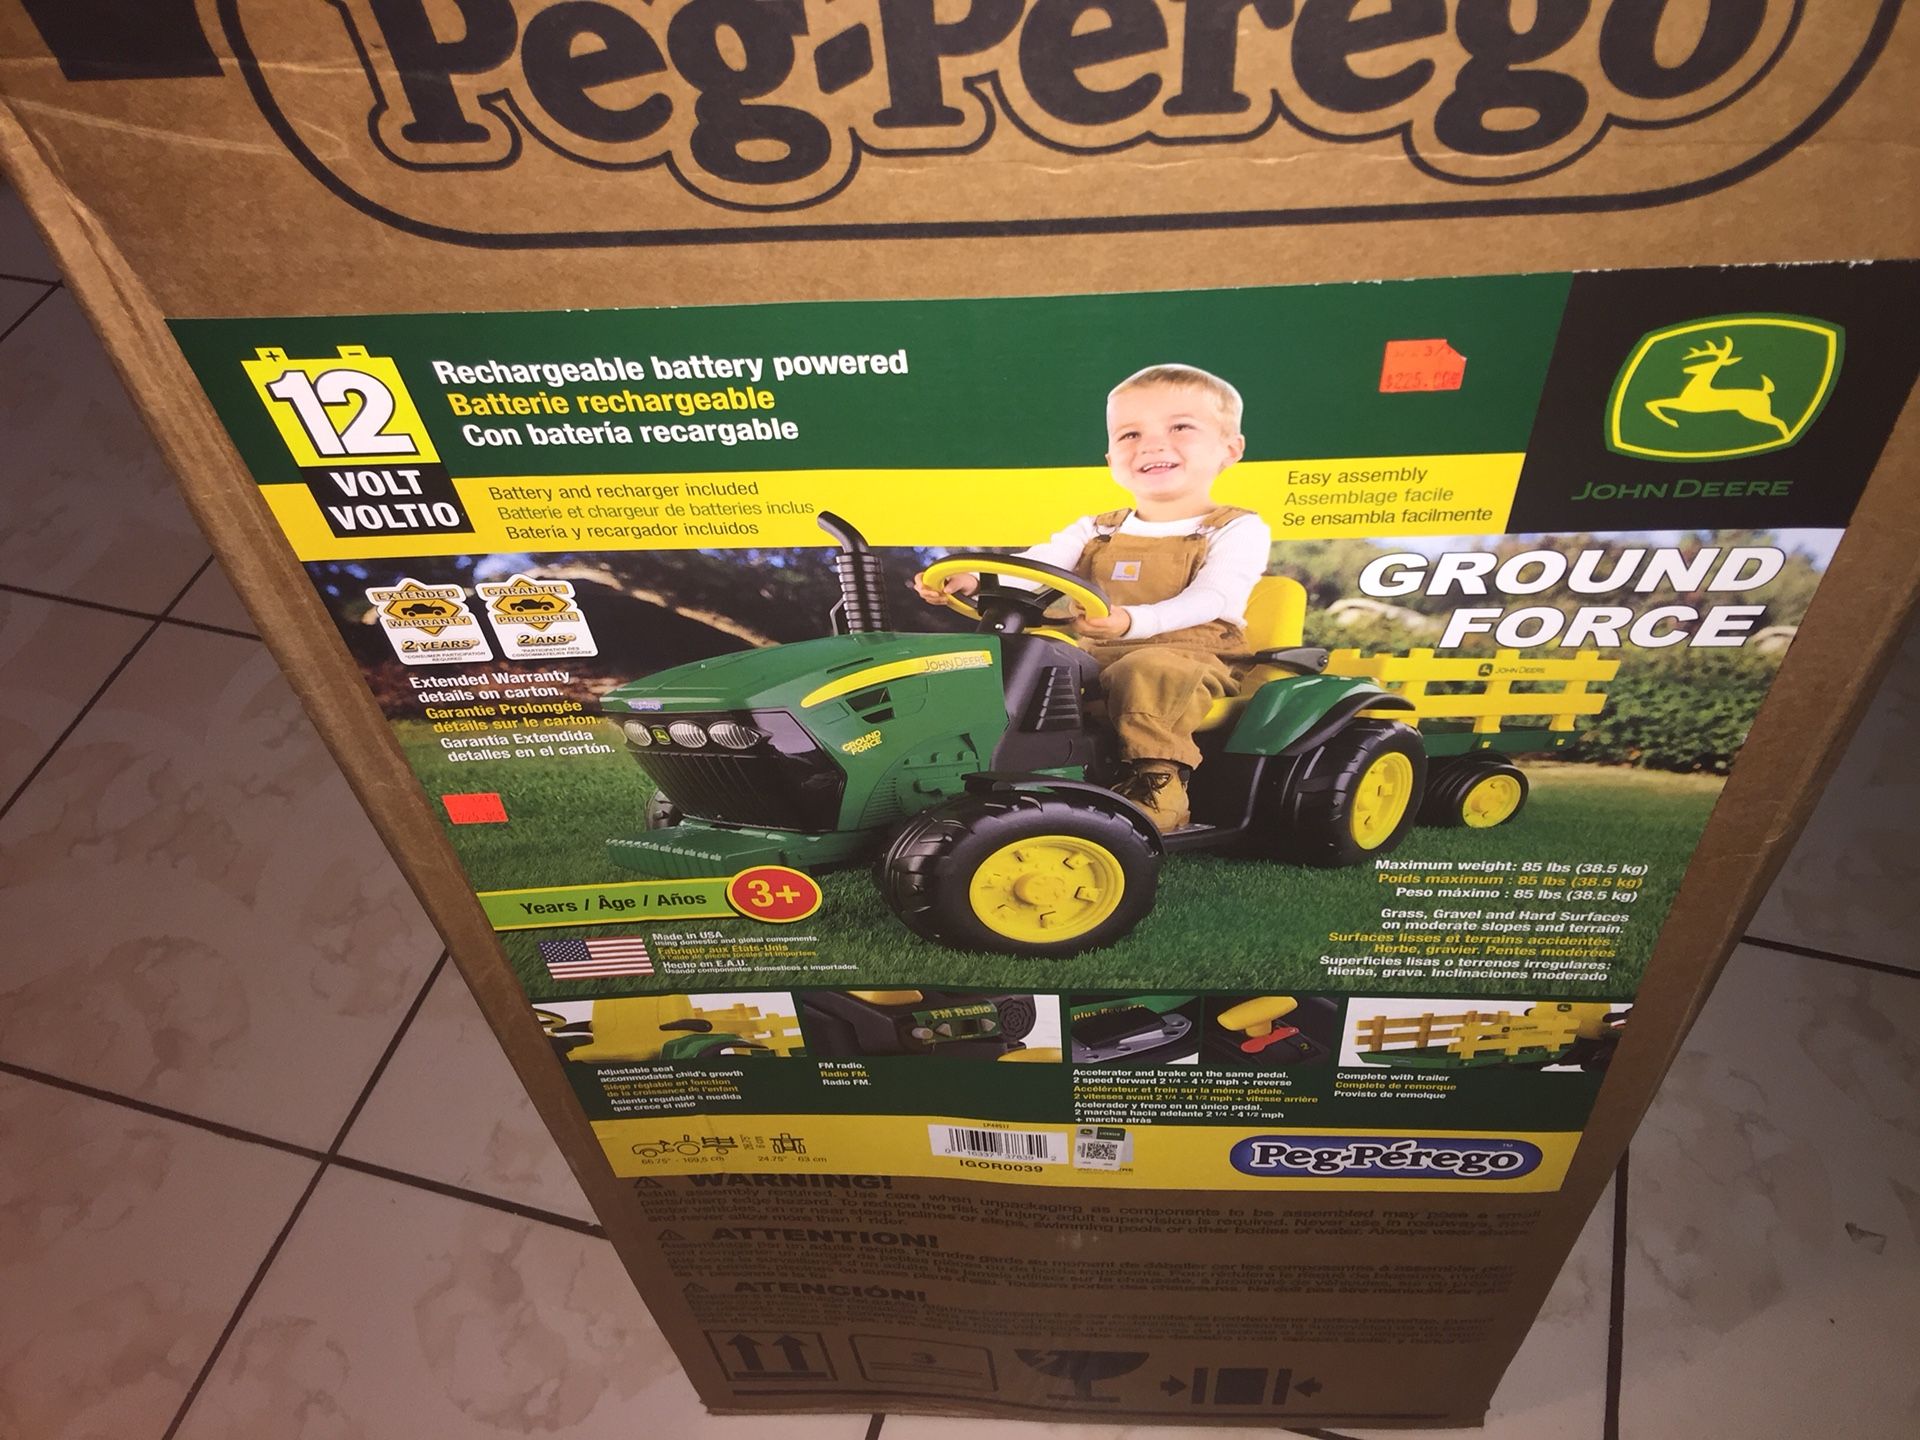 John Deere Ground Force Tractor Parts, Toy Parts